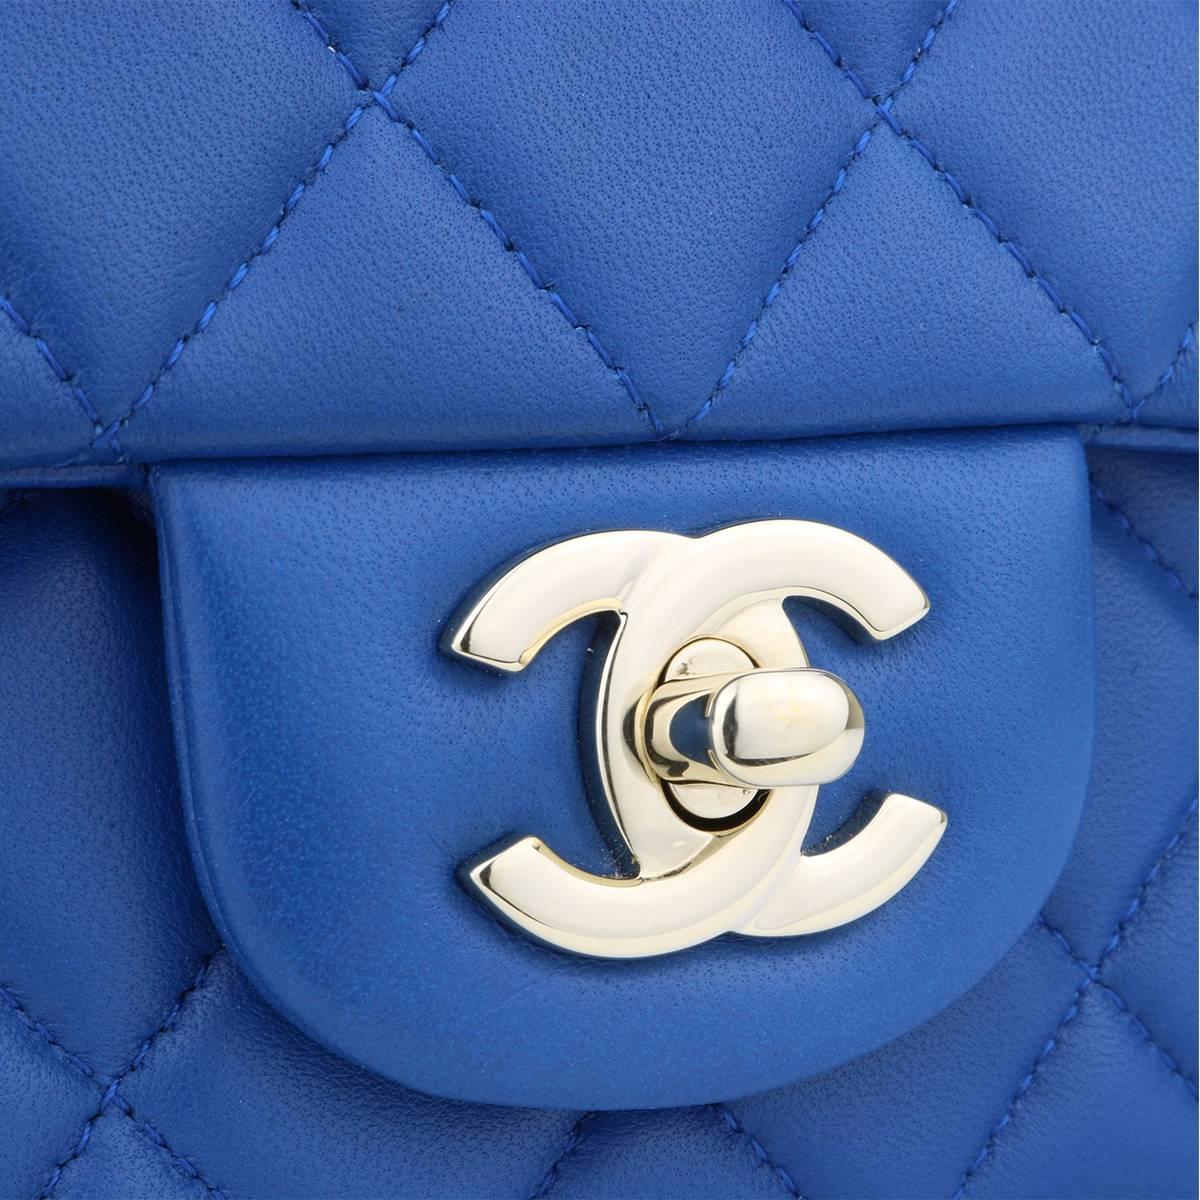 CHANEL Rectangular Mini Blue Lambskin with Light Gold Hardware 2017.

This stunning bag is still in mint condition, the bag still holds the original shape and the hardware still shiny. Leather still smells fresh as if new. A truly stunning colour